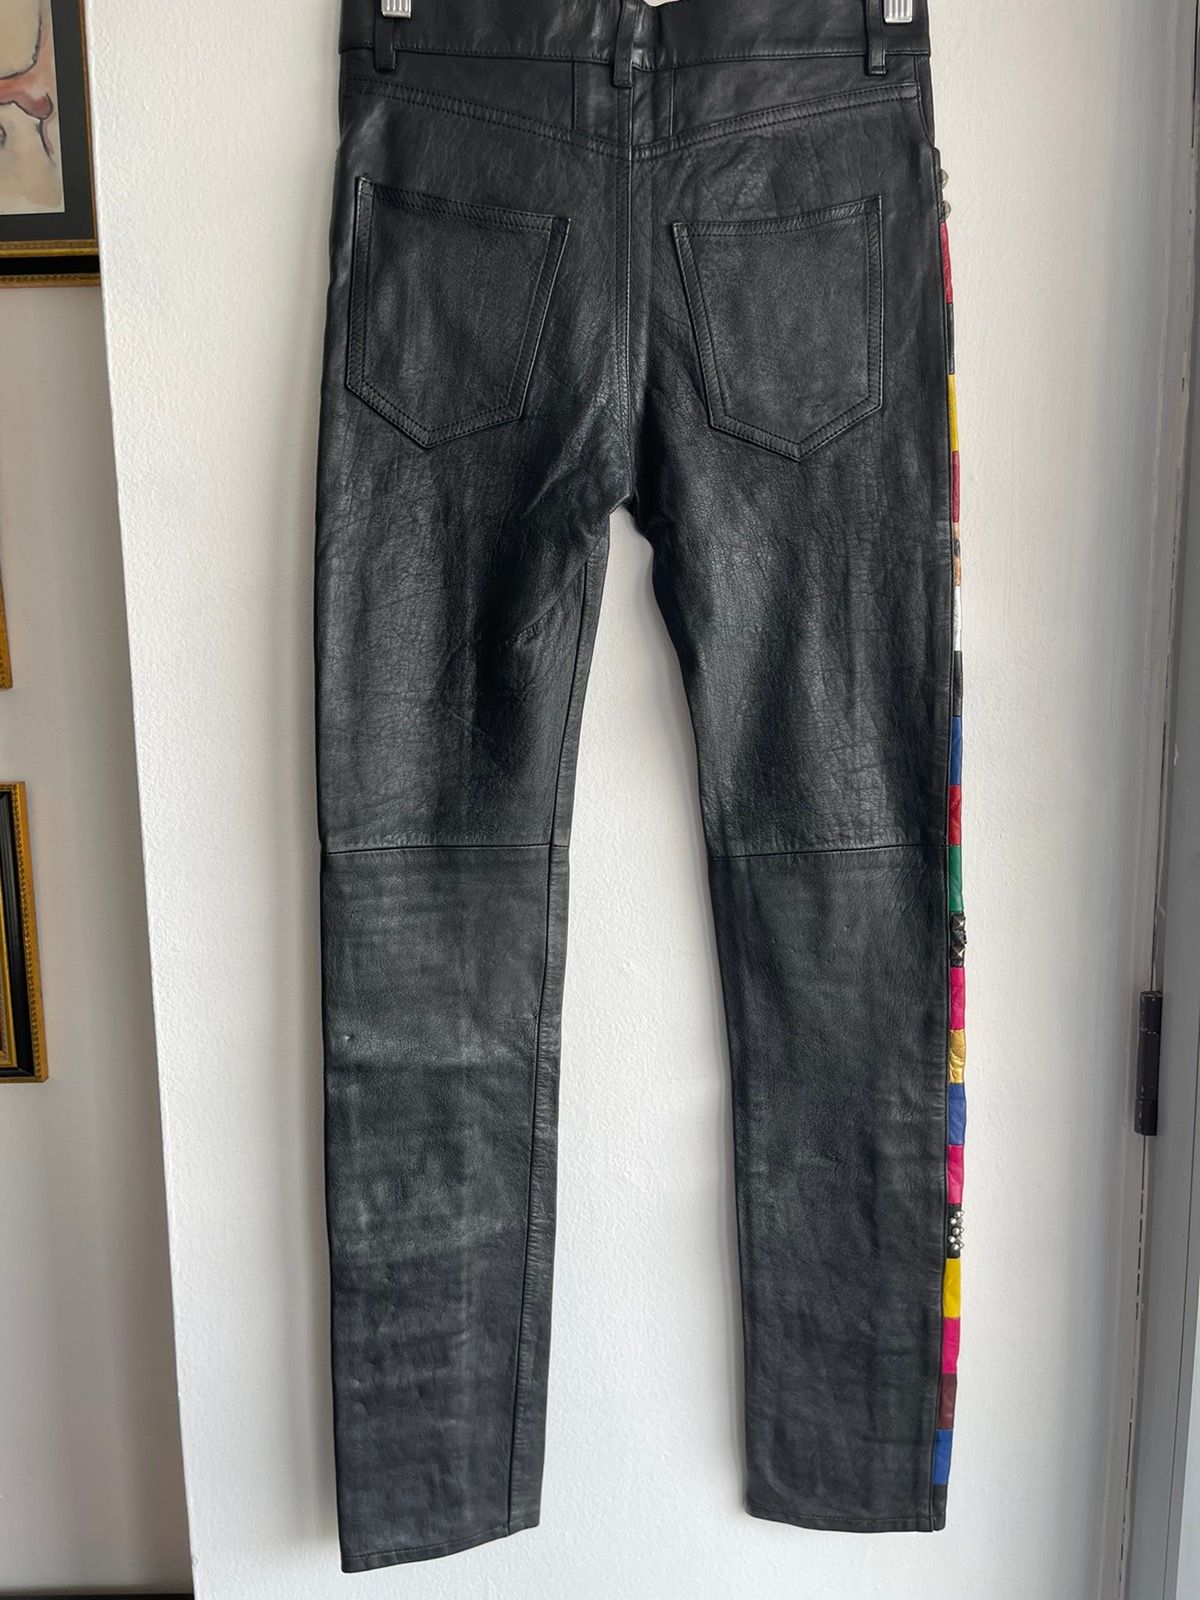 SLP SS16 1 of 1 Sample Proto PATCHWORK LEATHER PANTS JEANS